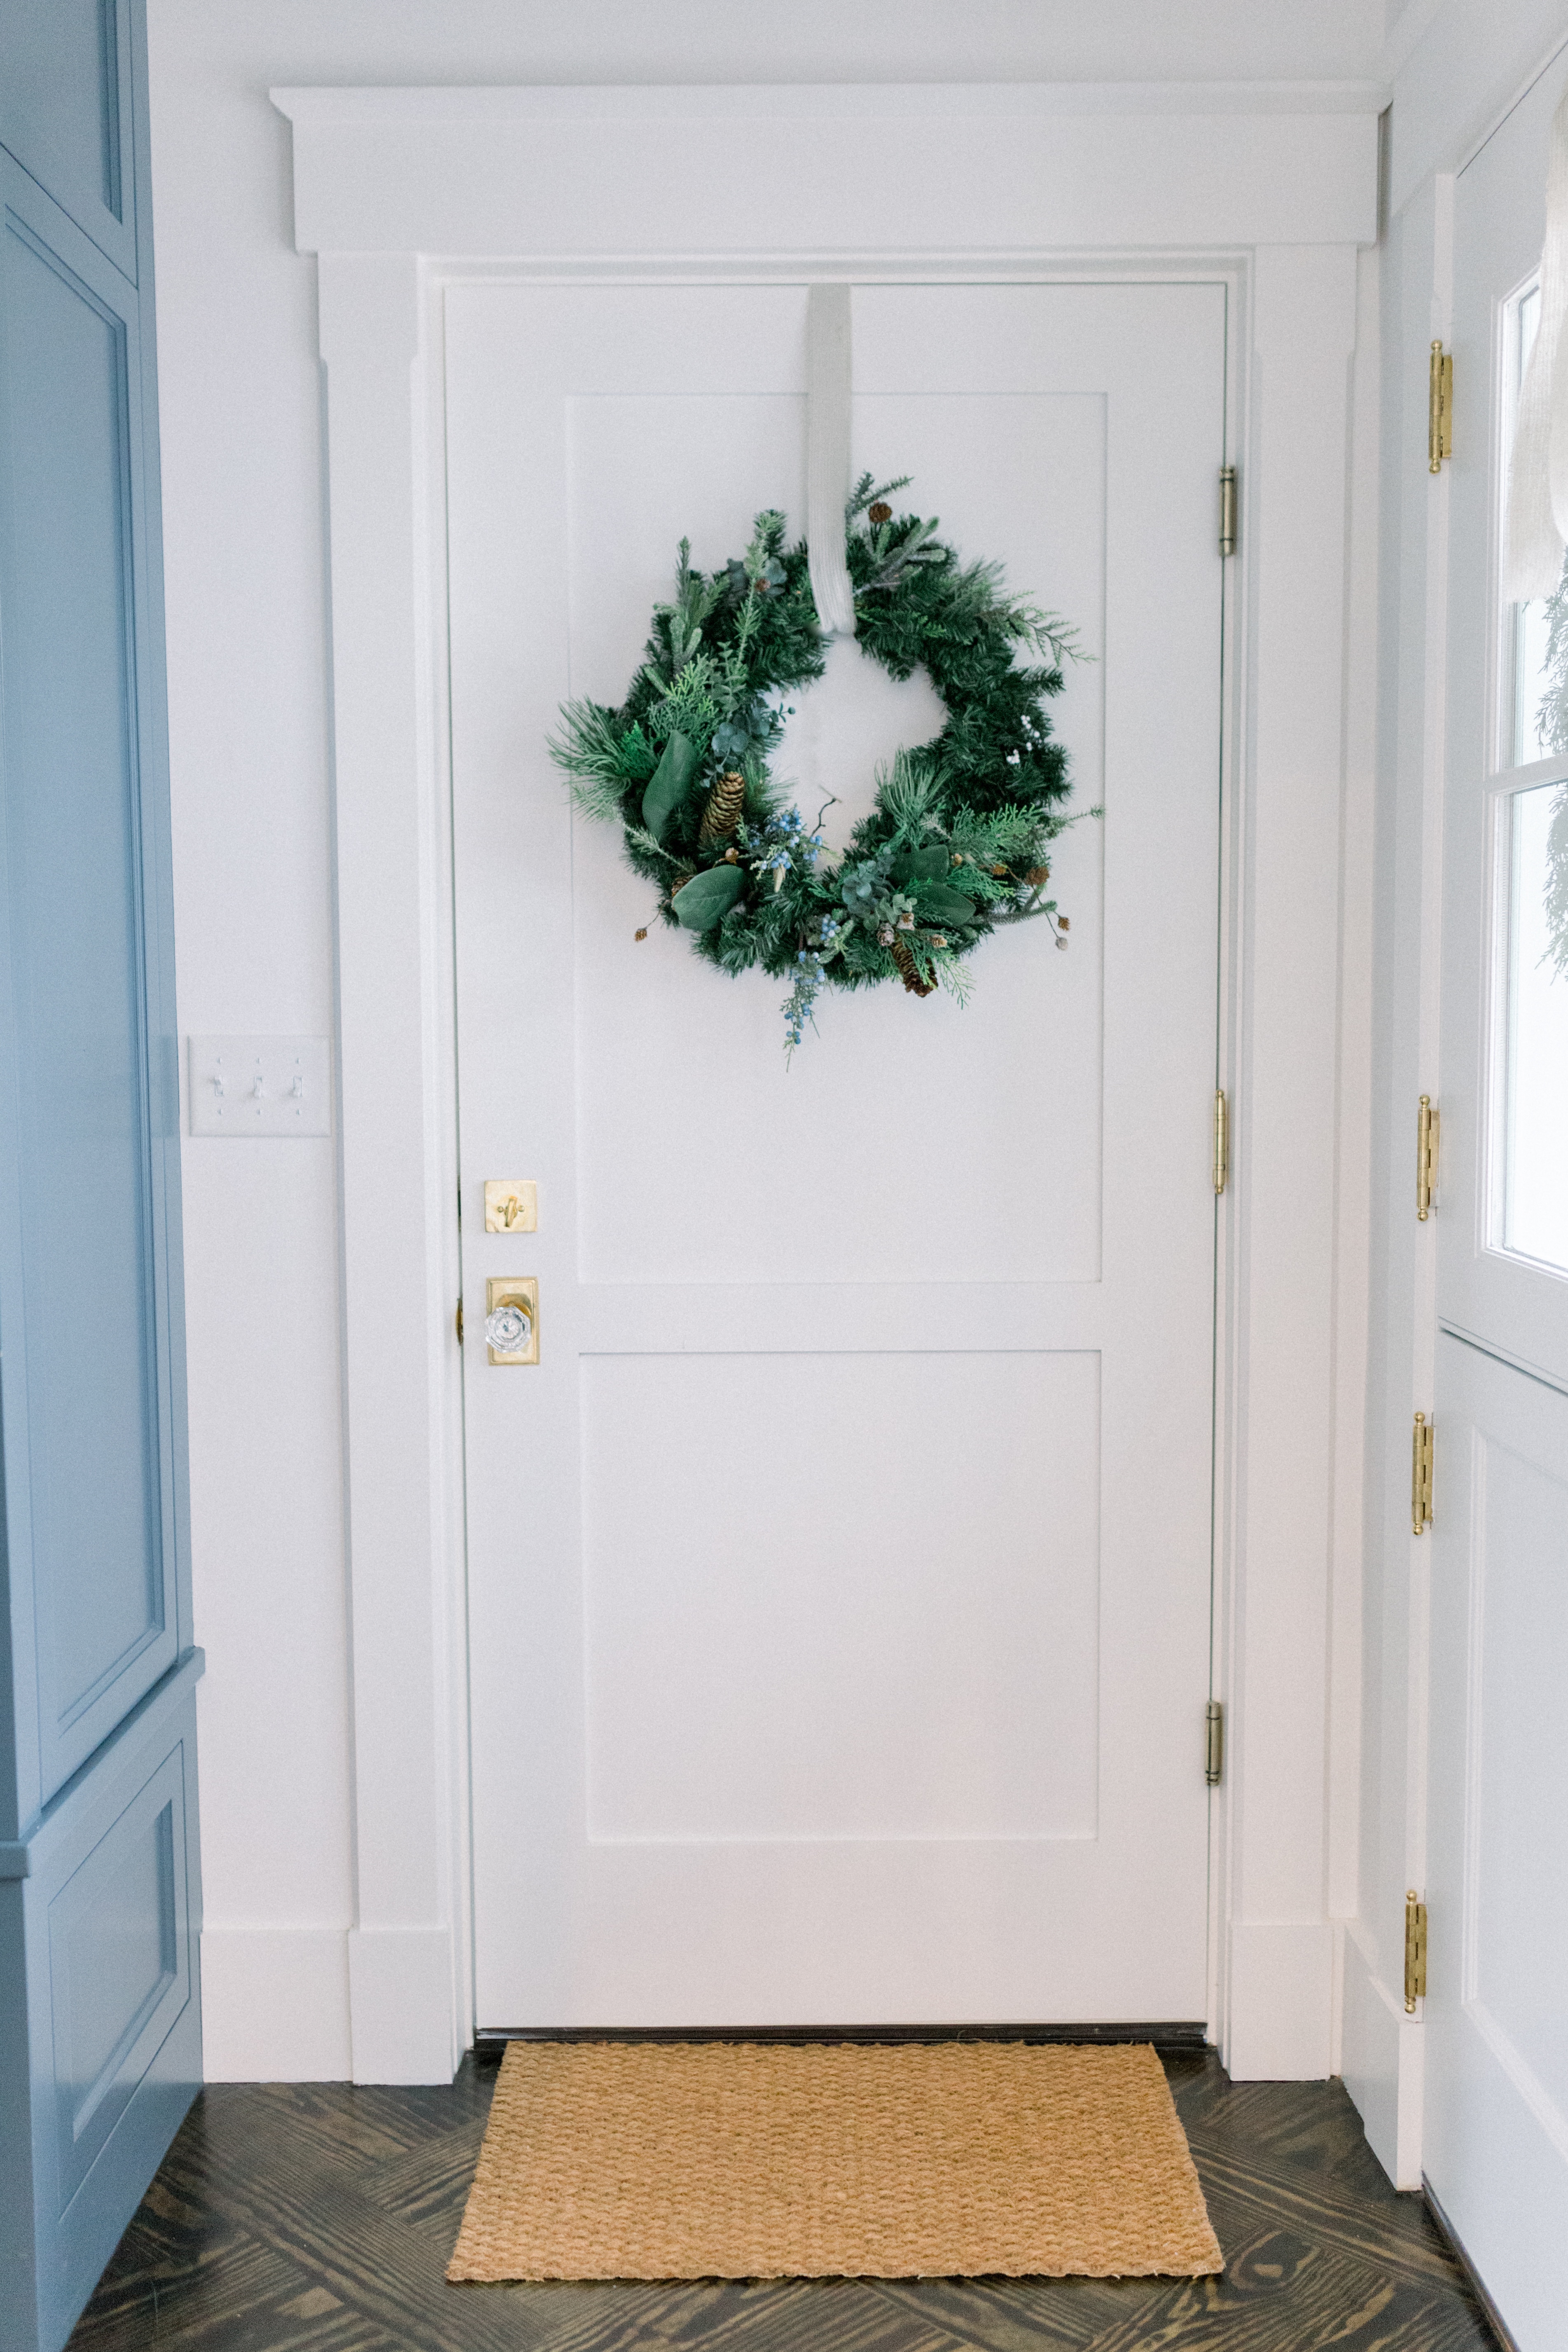 A Coastal Christmas-Home Tour - Finding Lovely